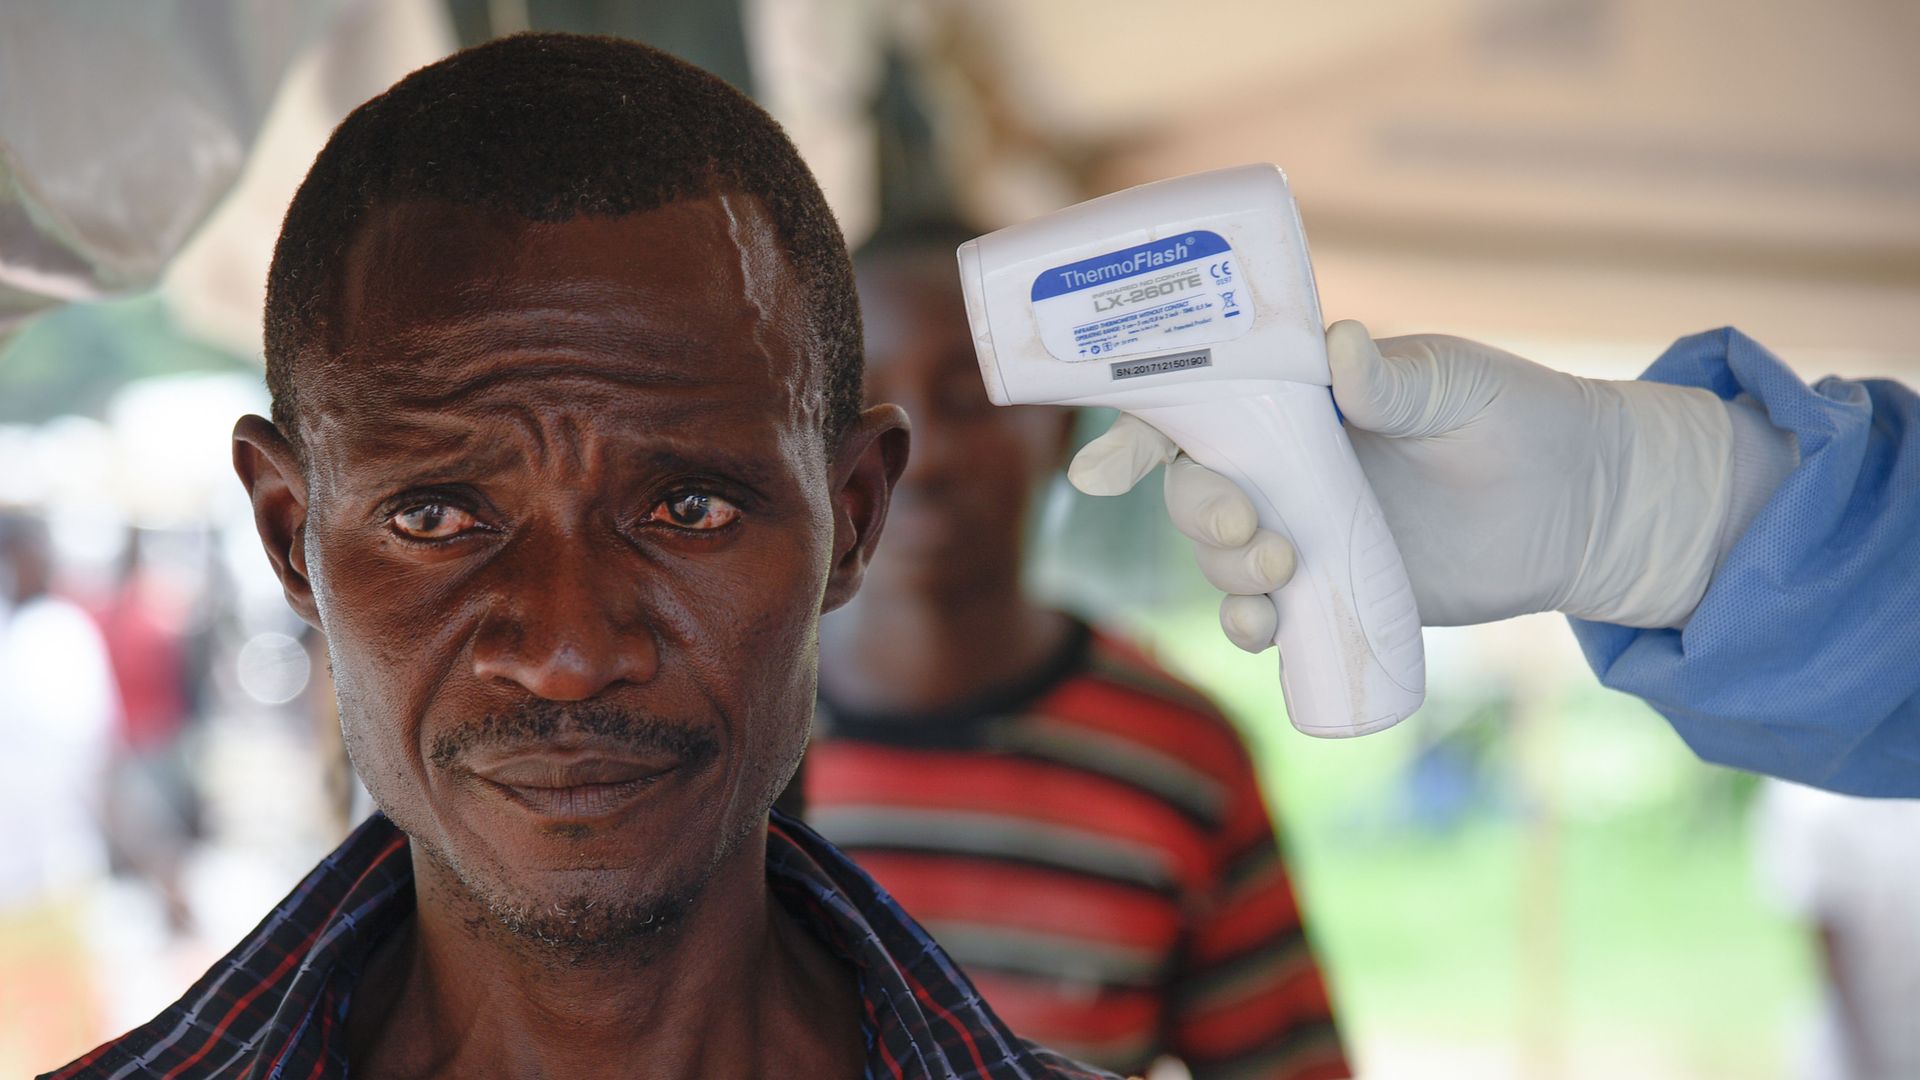 A man in the Congo is being checked for Ebola